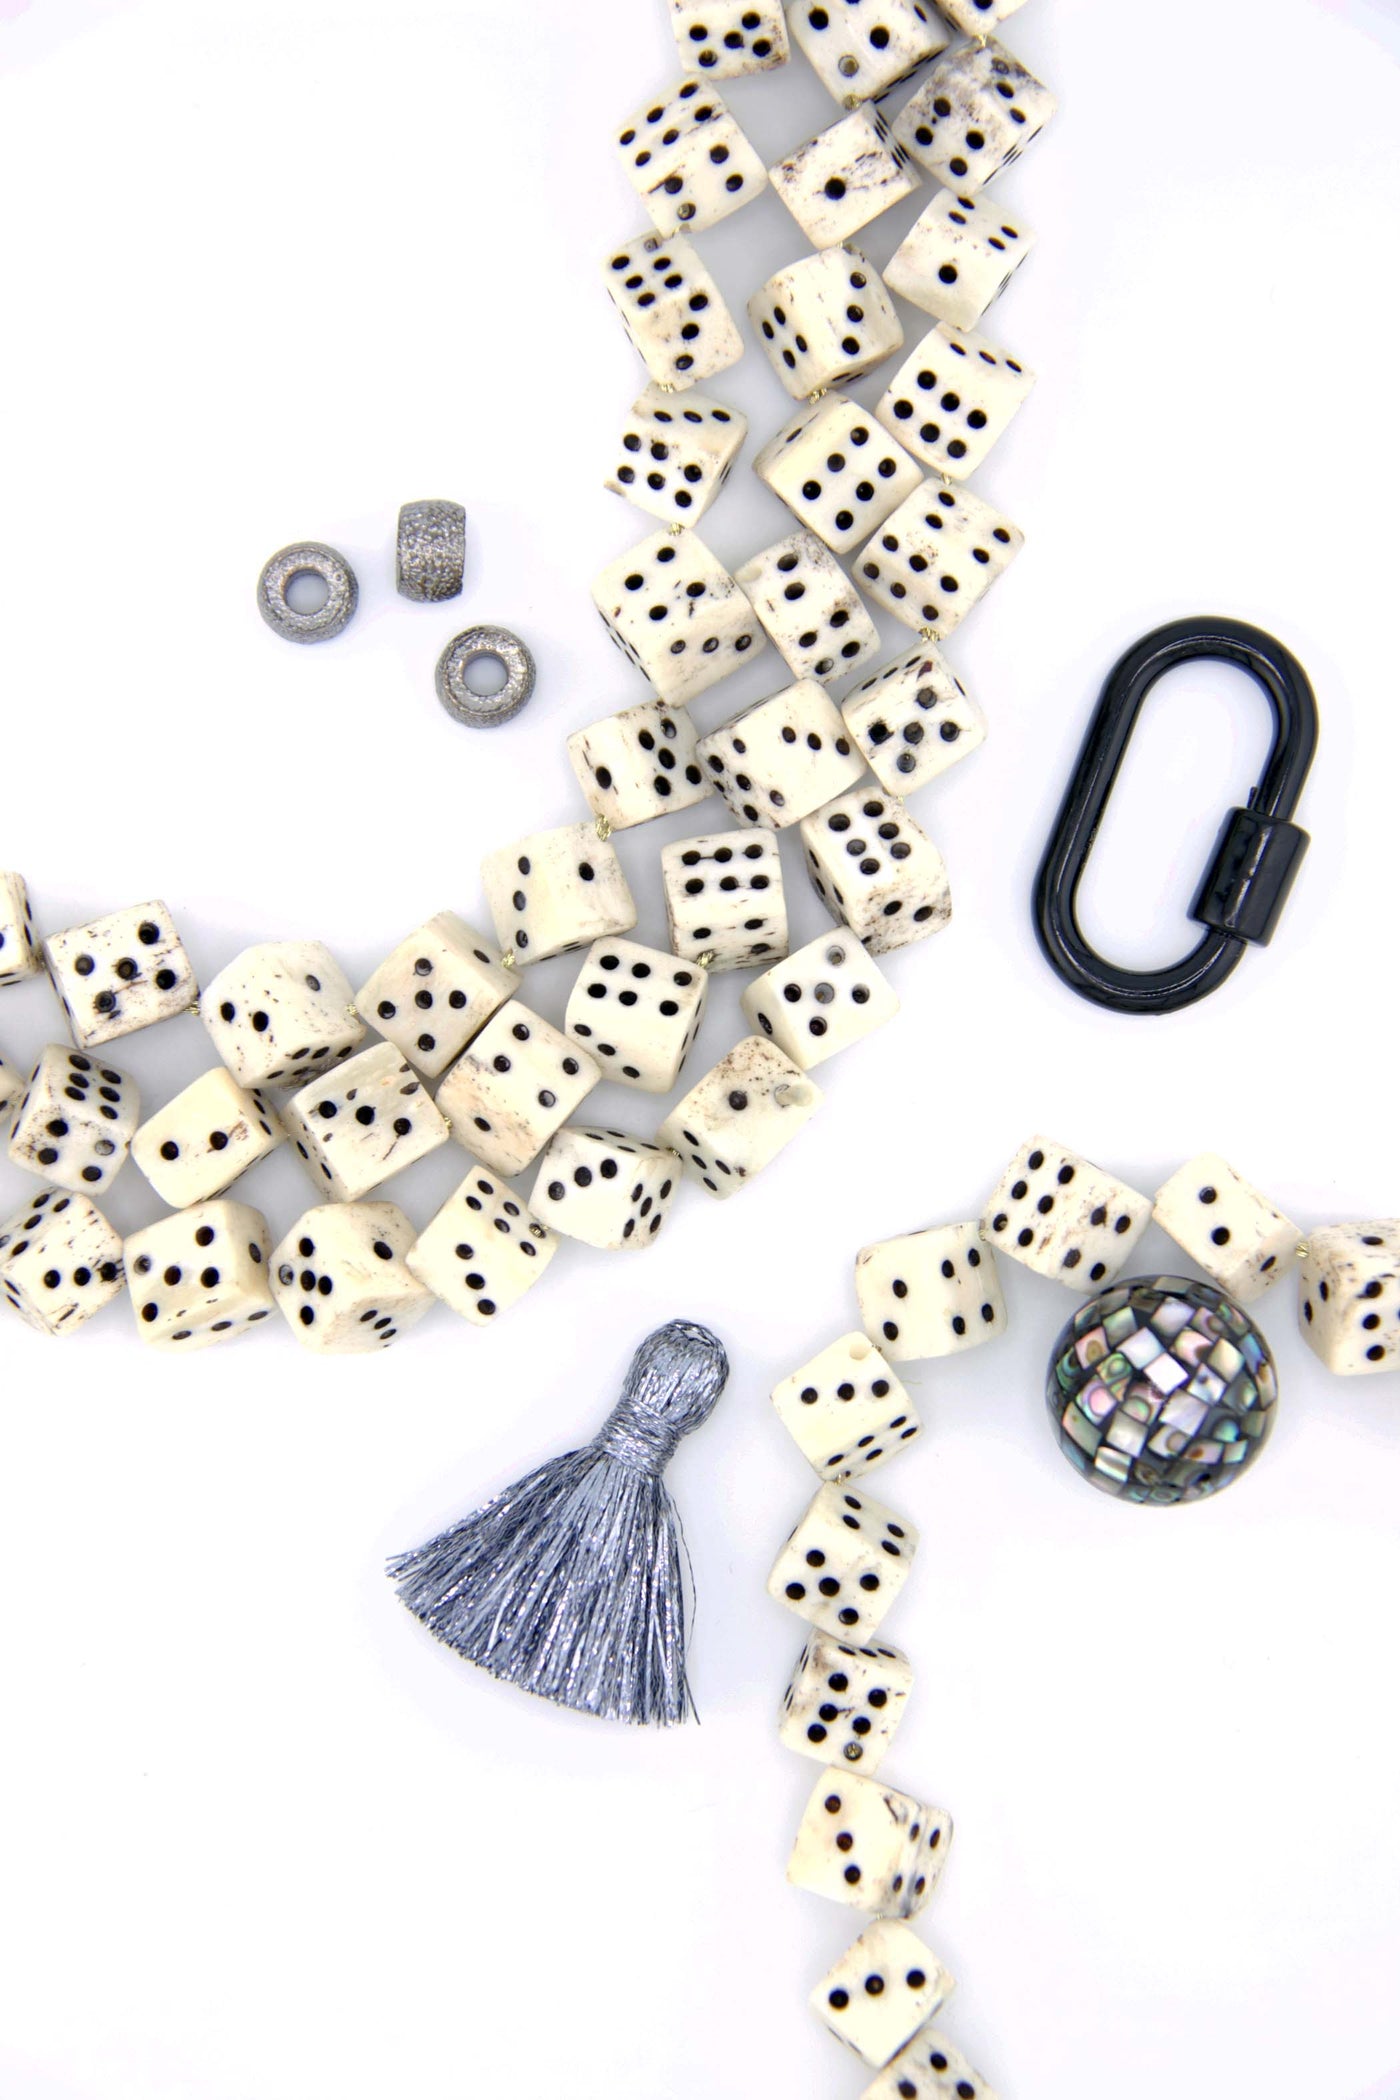 Black & White Dice Beads, Hand Carved Game Beads, 10-12mm, Handmade natural dice beads